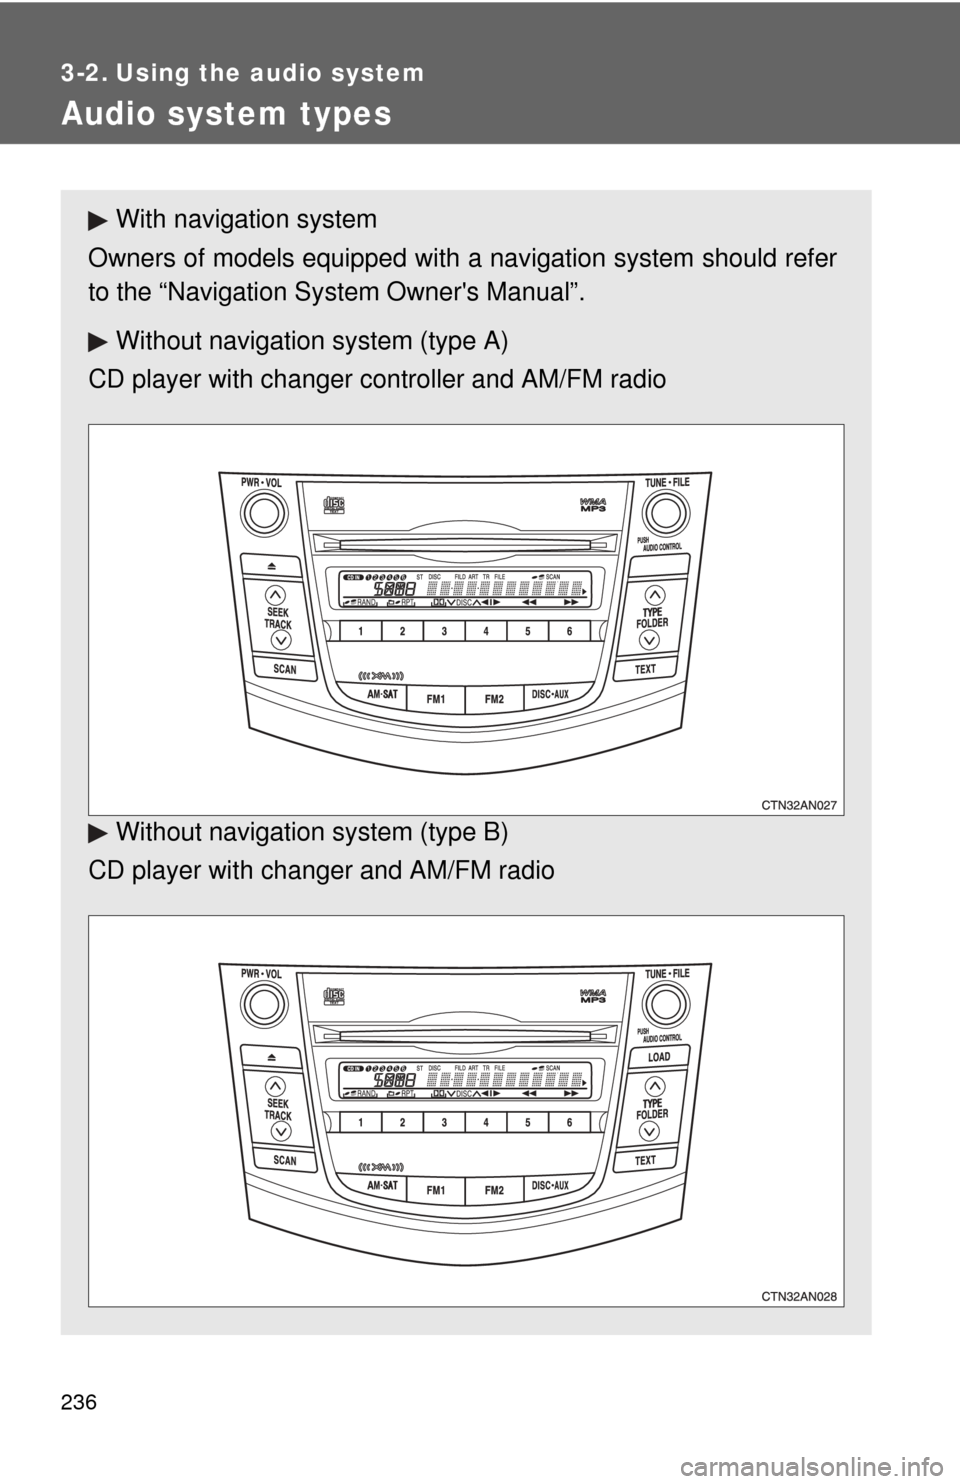 TOYOTA RAV4 2010 XA30 / 3.G Owners Manual 236
3-2. Using the audio system
Audio system types
With navigation system
Owners of models equipped with  a navigation system should refer
to the “Navigation Sy stem Owners Manual”.
Without navig